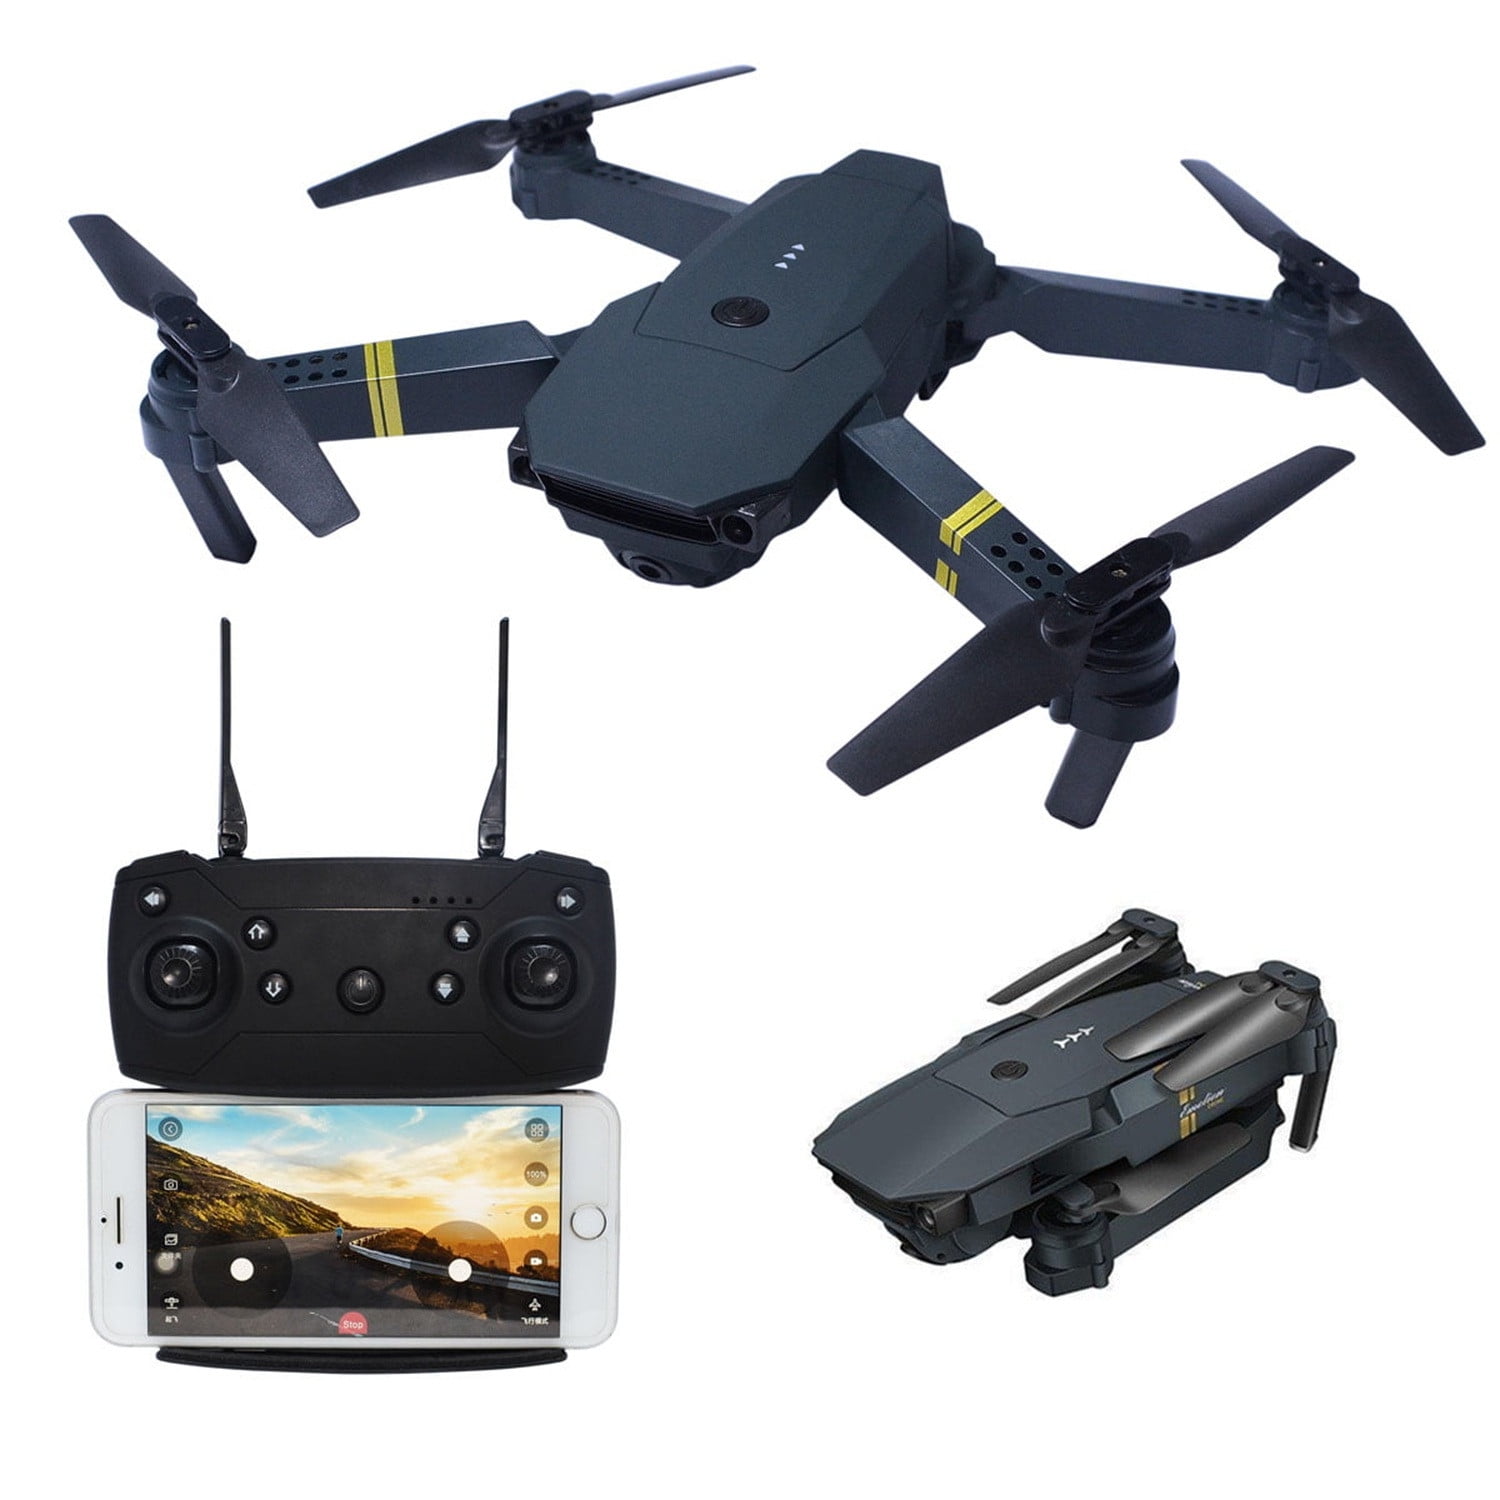 Professional Foldable Mini Drone  With 4K Camera, Wide Angle Design,  Long Range Video, 2MP, WiFi FPV, 3D Video Capability, Height Keeping, And  RC Quadcopter Perfect Gift Toy From Anica, $36.23